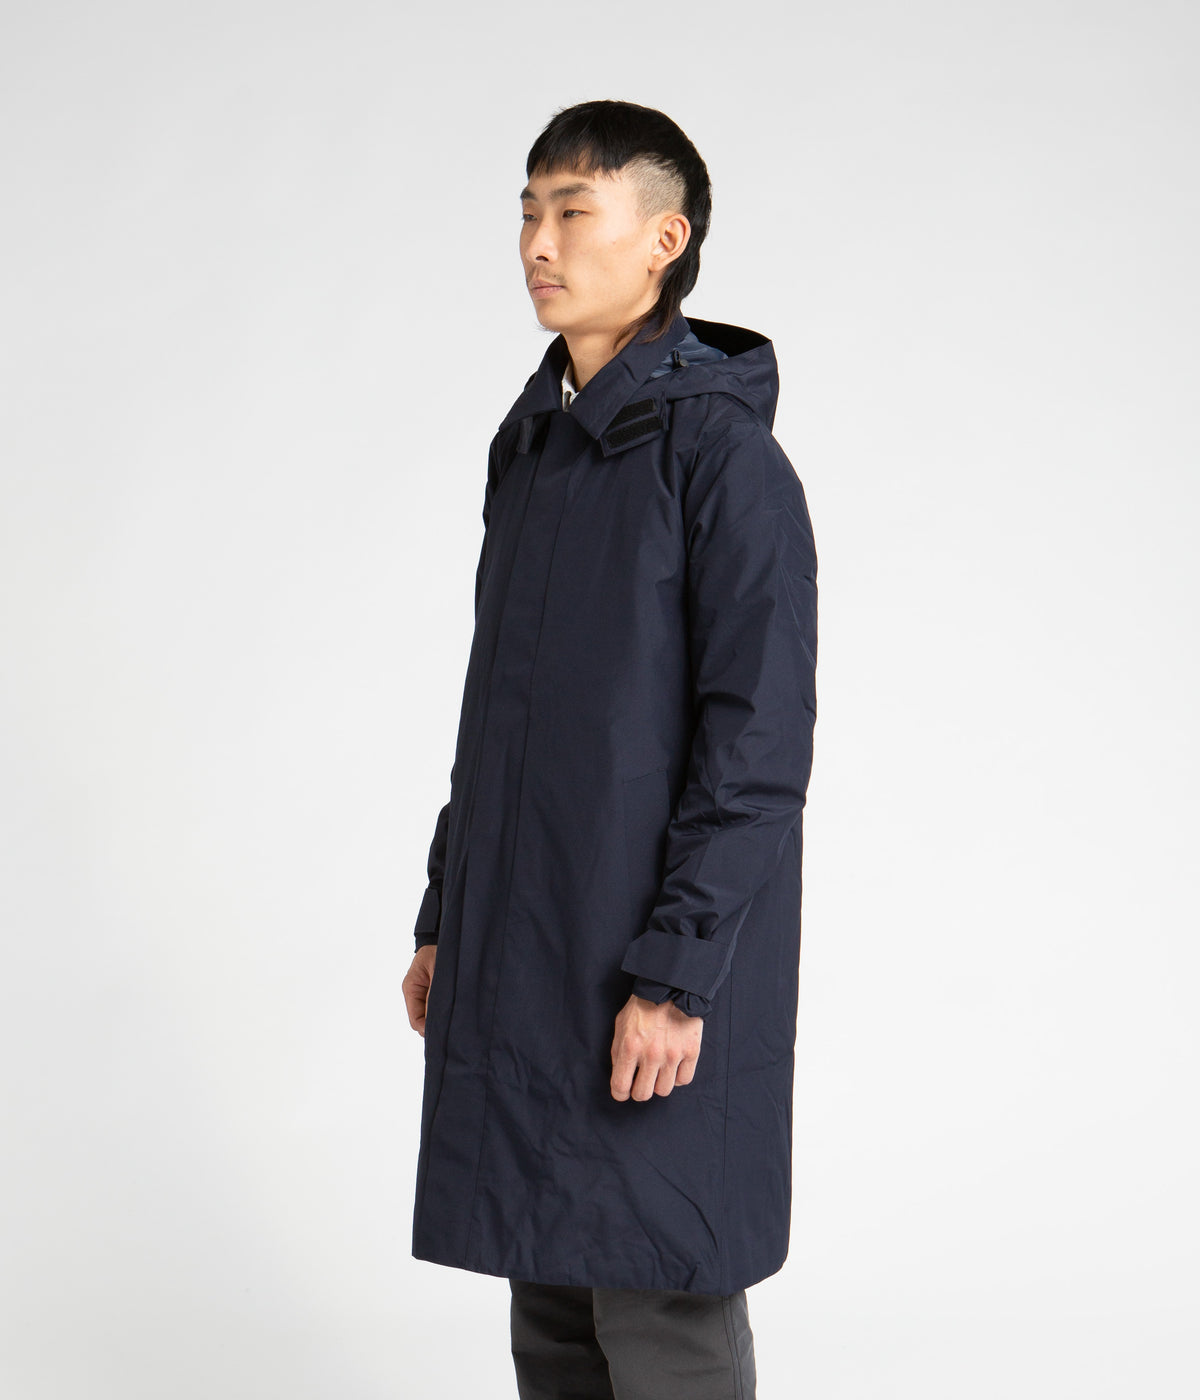 Norse | Gore-Tex Jacket - 2.0 Thor Infinium in Projects Always Colour Navy Dark